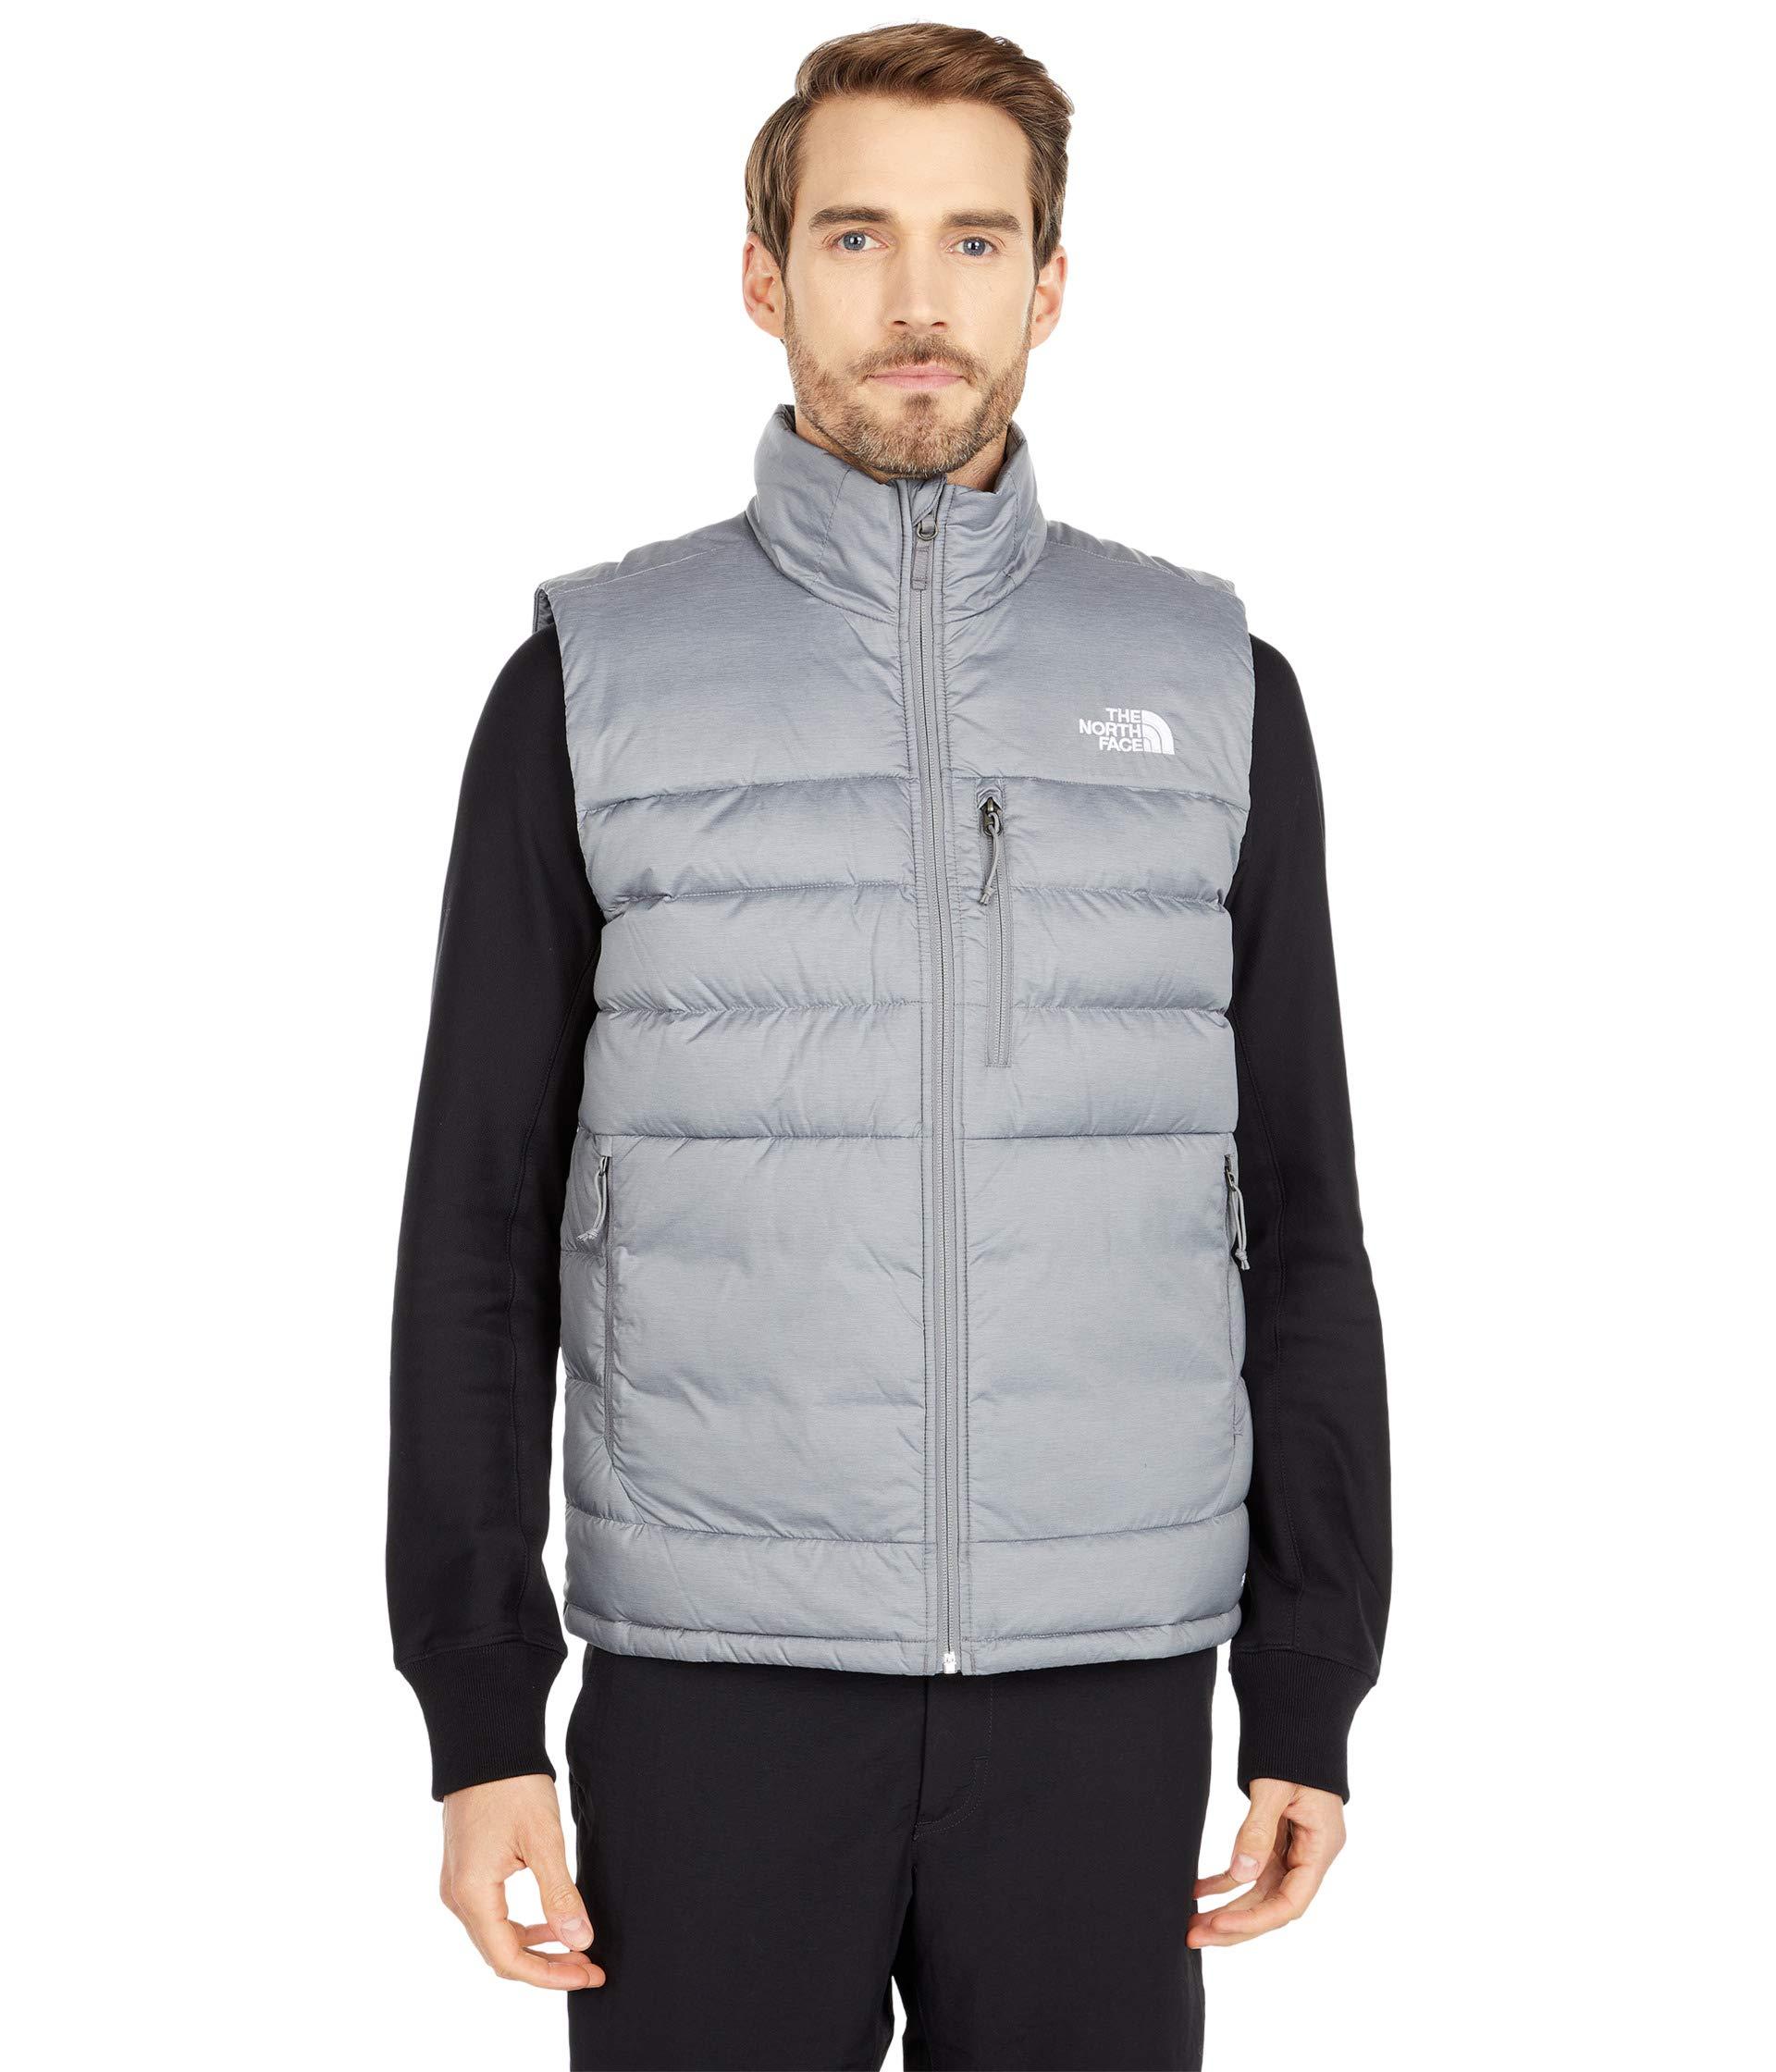 The North Face Synthetic Aconcagua 2 Vest in Gray for Men - Lyst